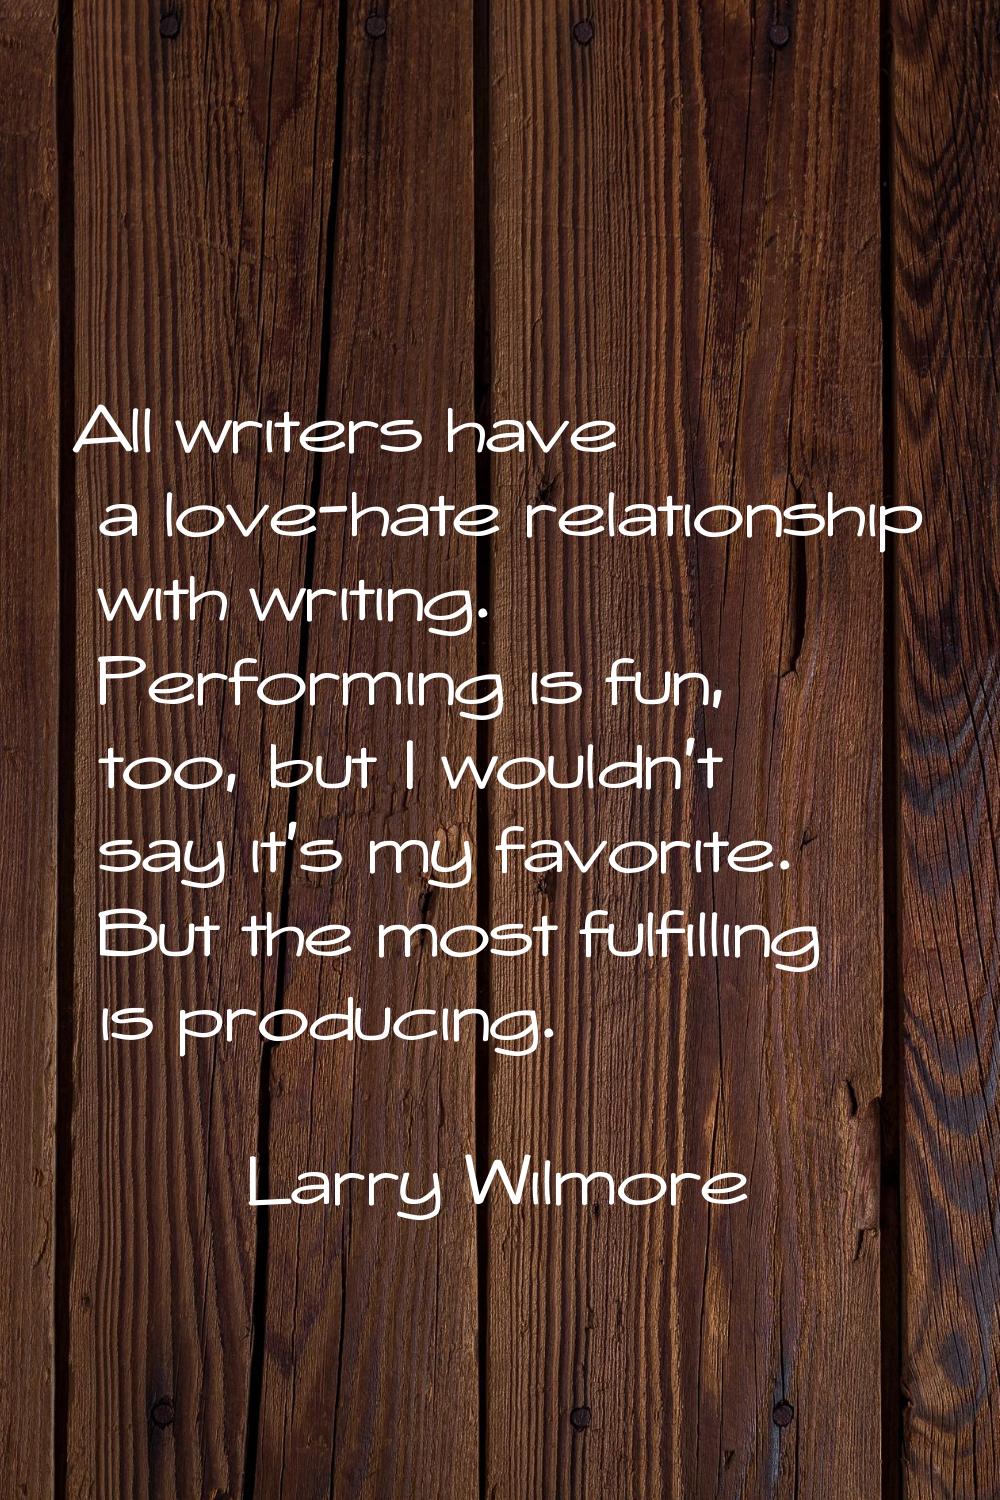 All writers have a love-hate relationship with writing. Performing is fun, too, but I wouldn't say 